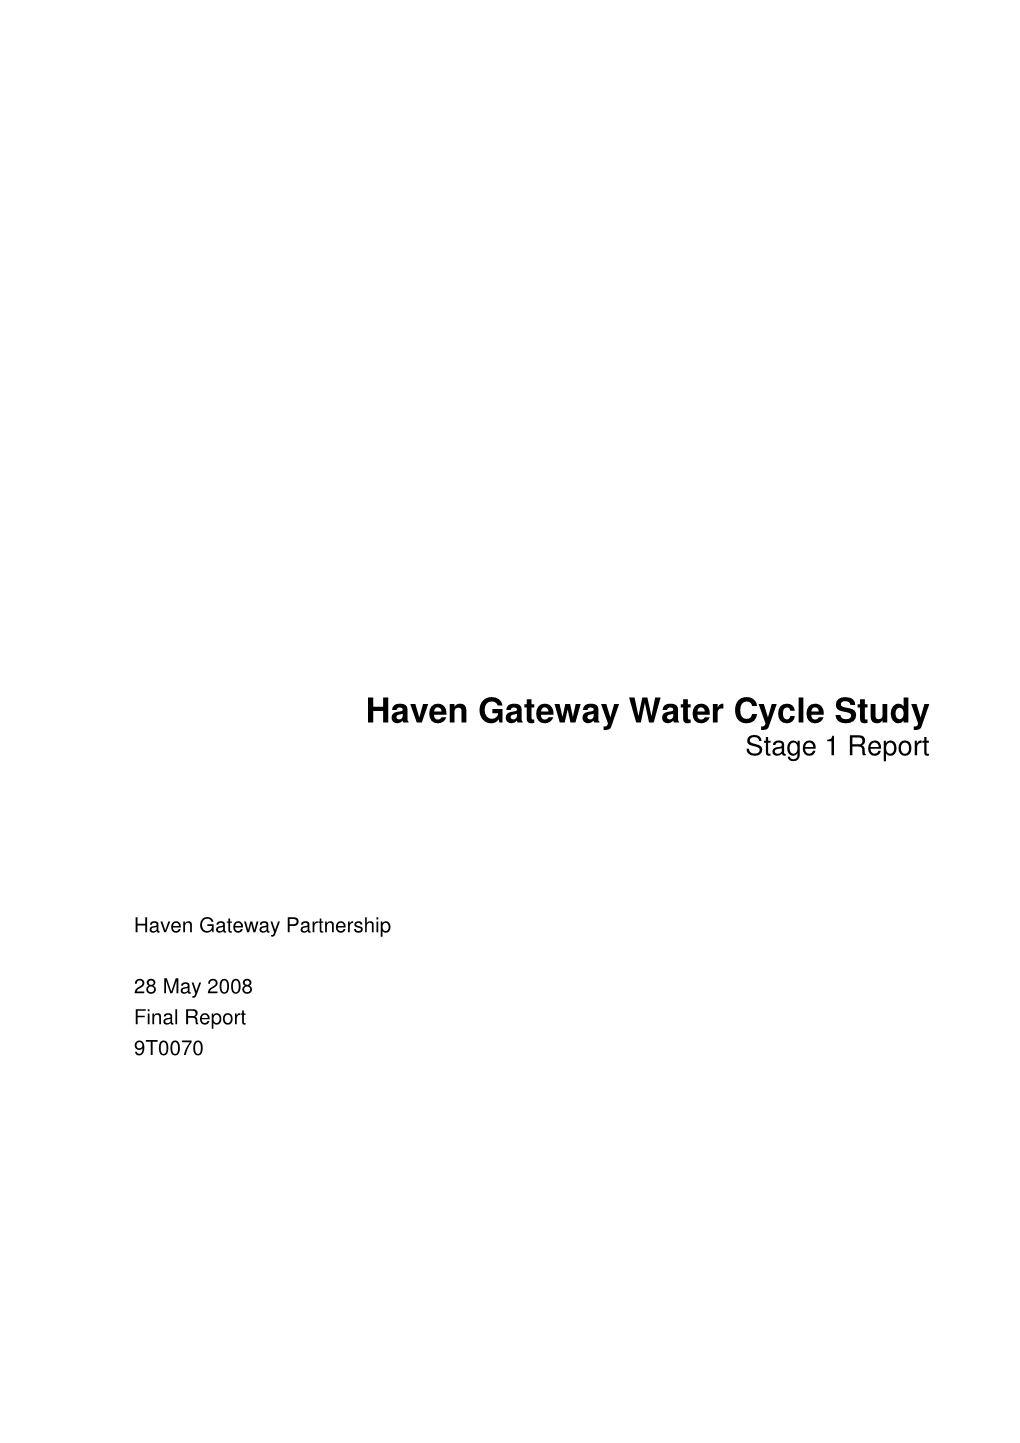 Haven Gateway Water Cycle Study Stage 1 Report